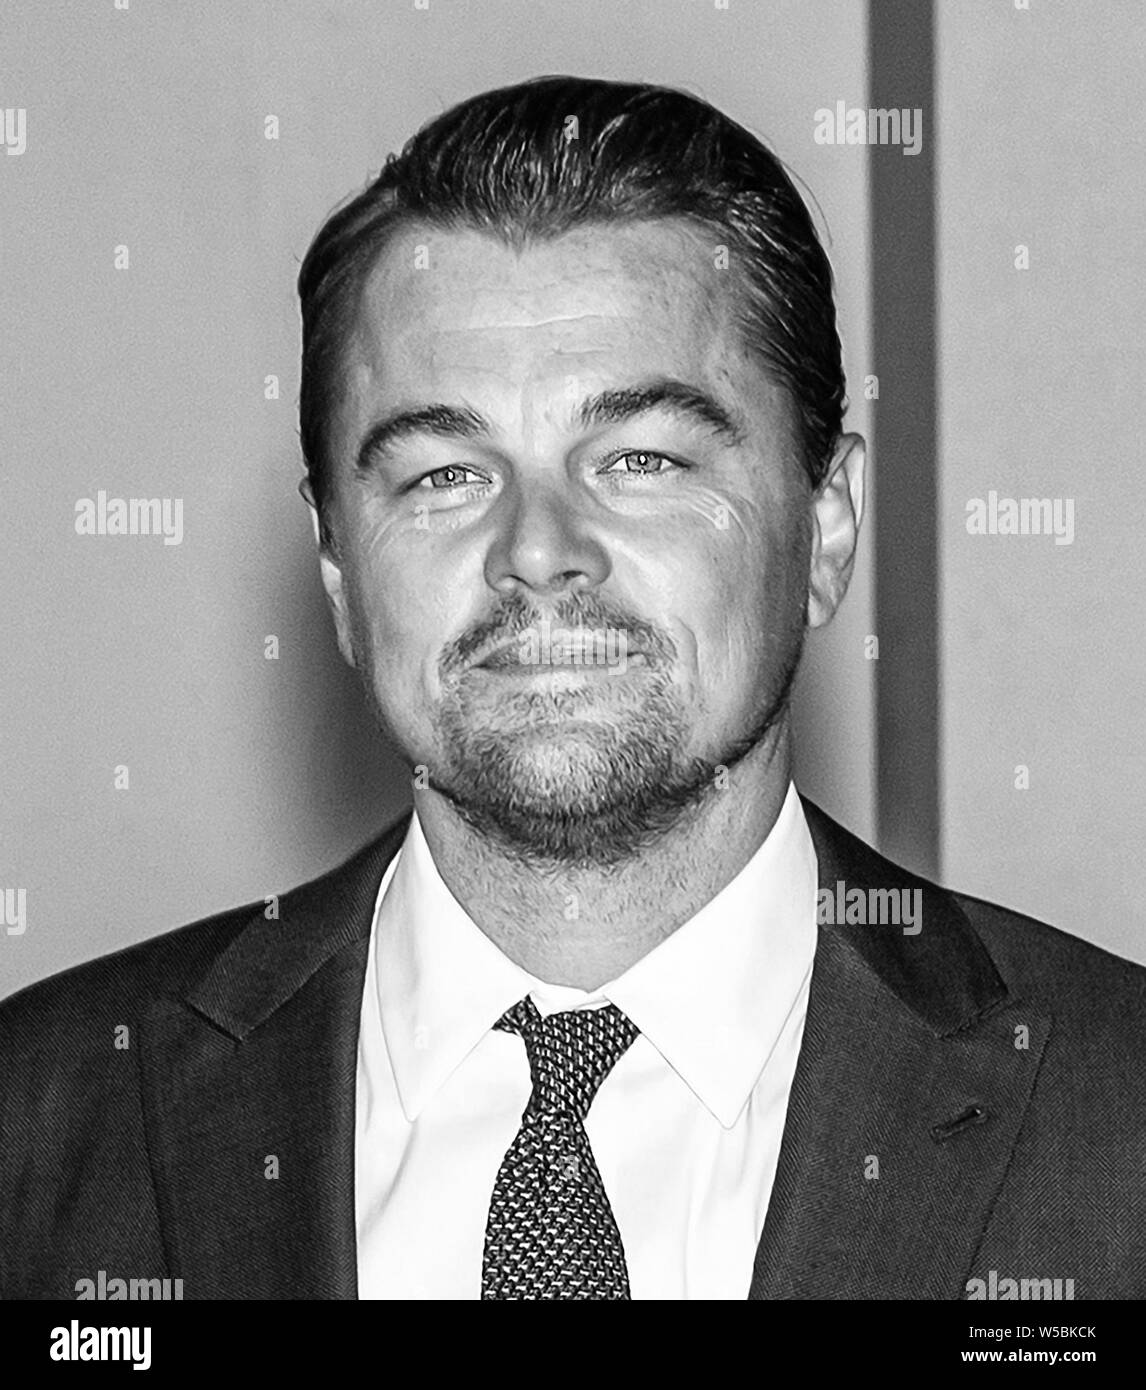 Los Angeles, CA - July 22, 2019: Leonardo DiCaprio attends The Los Angeles Premiere Of  'Once Upon a Time in Hollywood' held at TCL Chinese Theatre Stock Photo